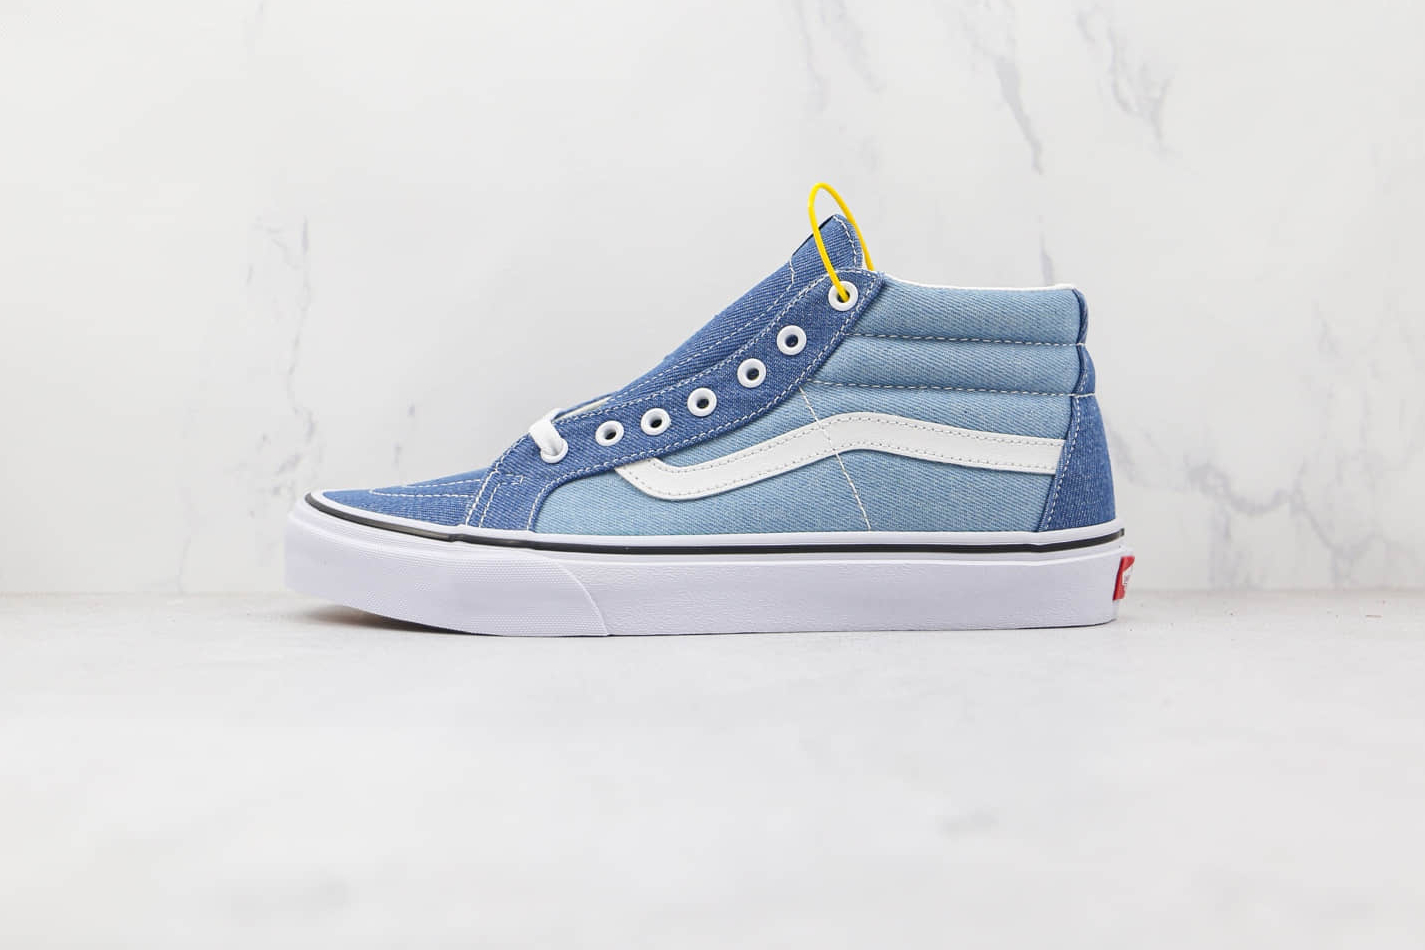 Vans Sk8-Mid Reissue Denim 2-Tone Shoes: Classic Style with a Modern Twist